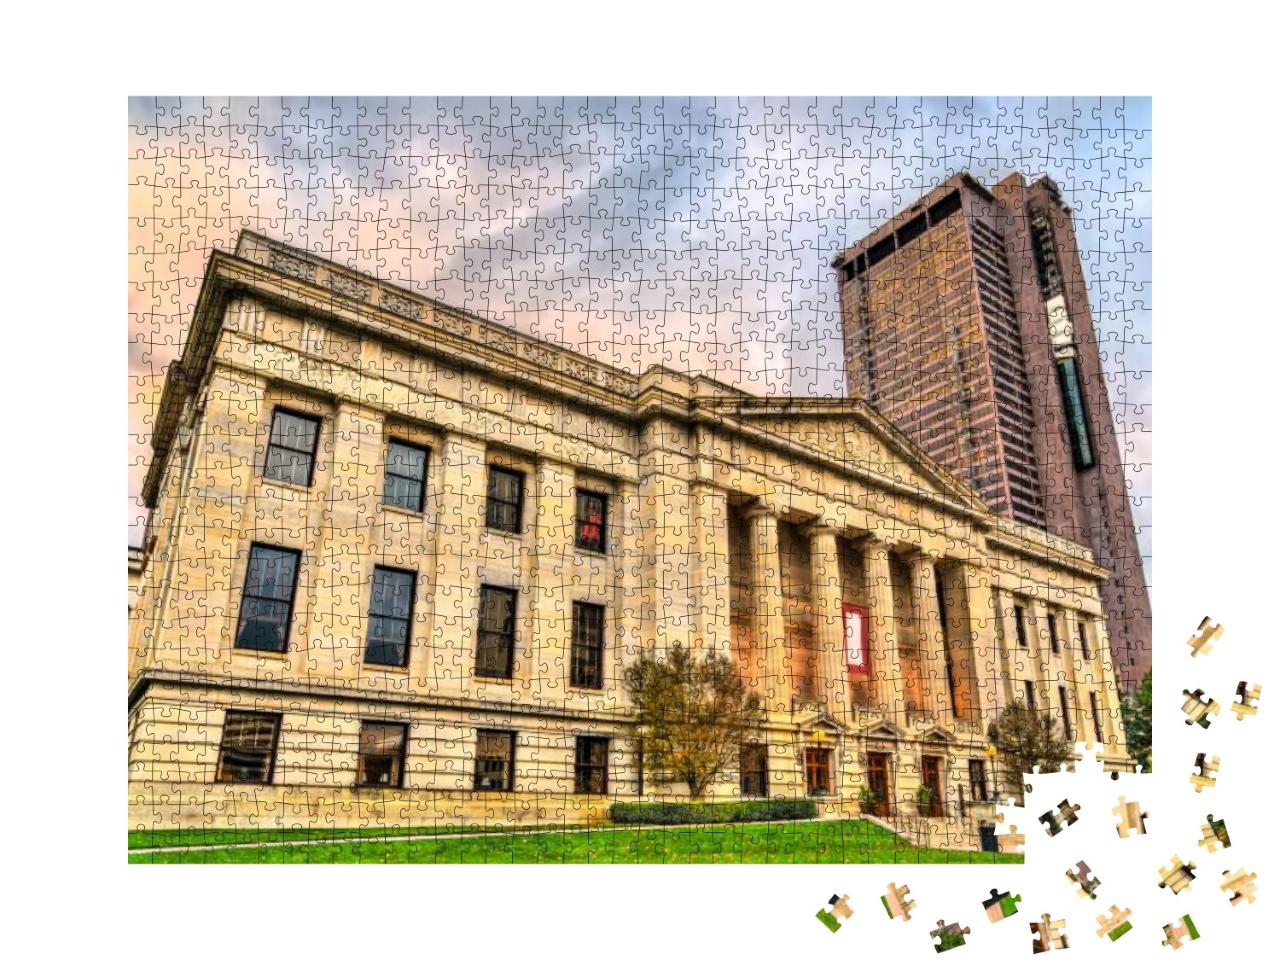 The Ohio Statehouse, the State Capitol Building & Seat of... Jigsaw Puzzle with 1000 pieces